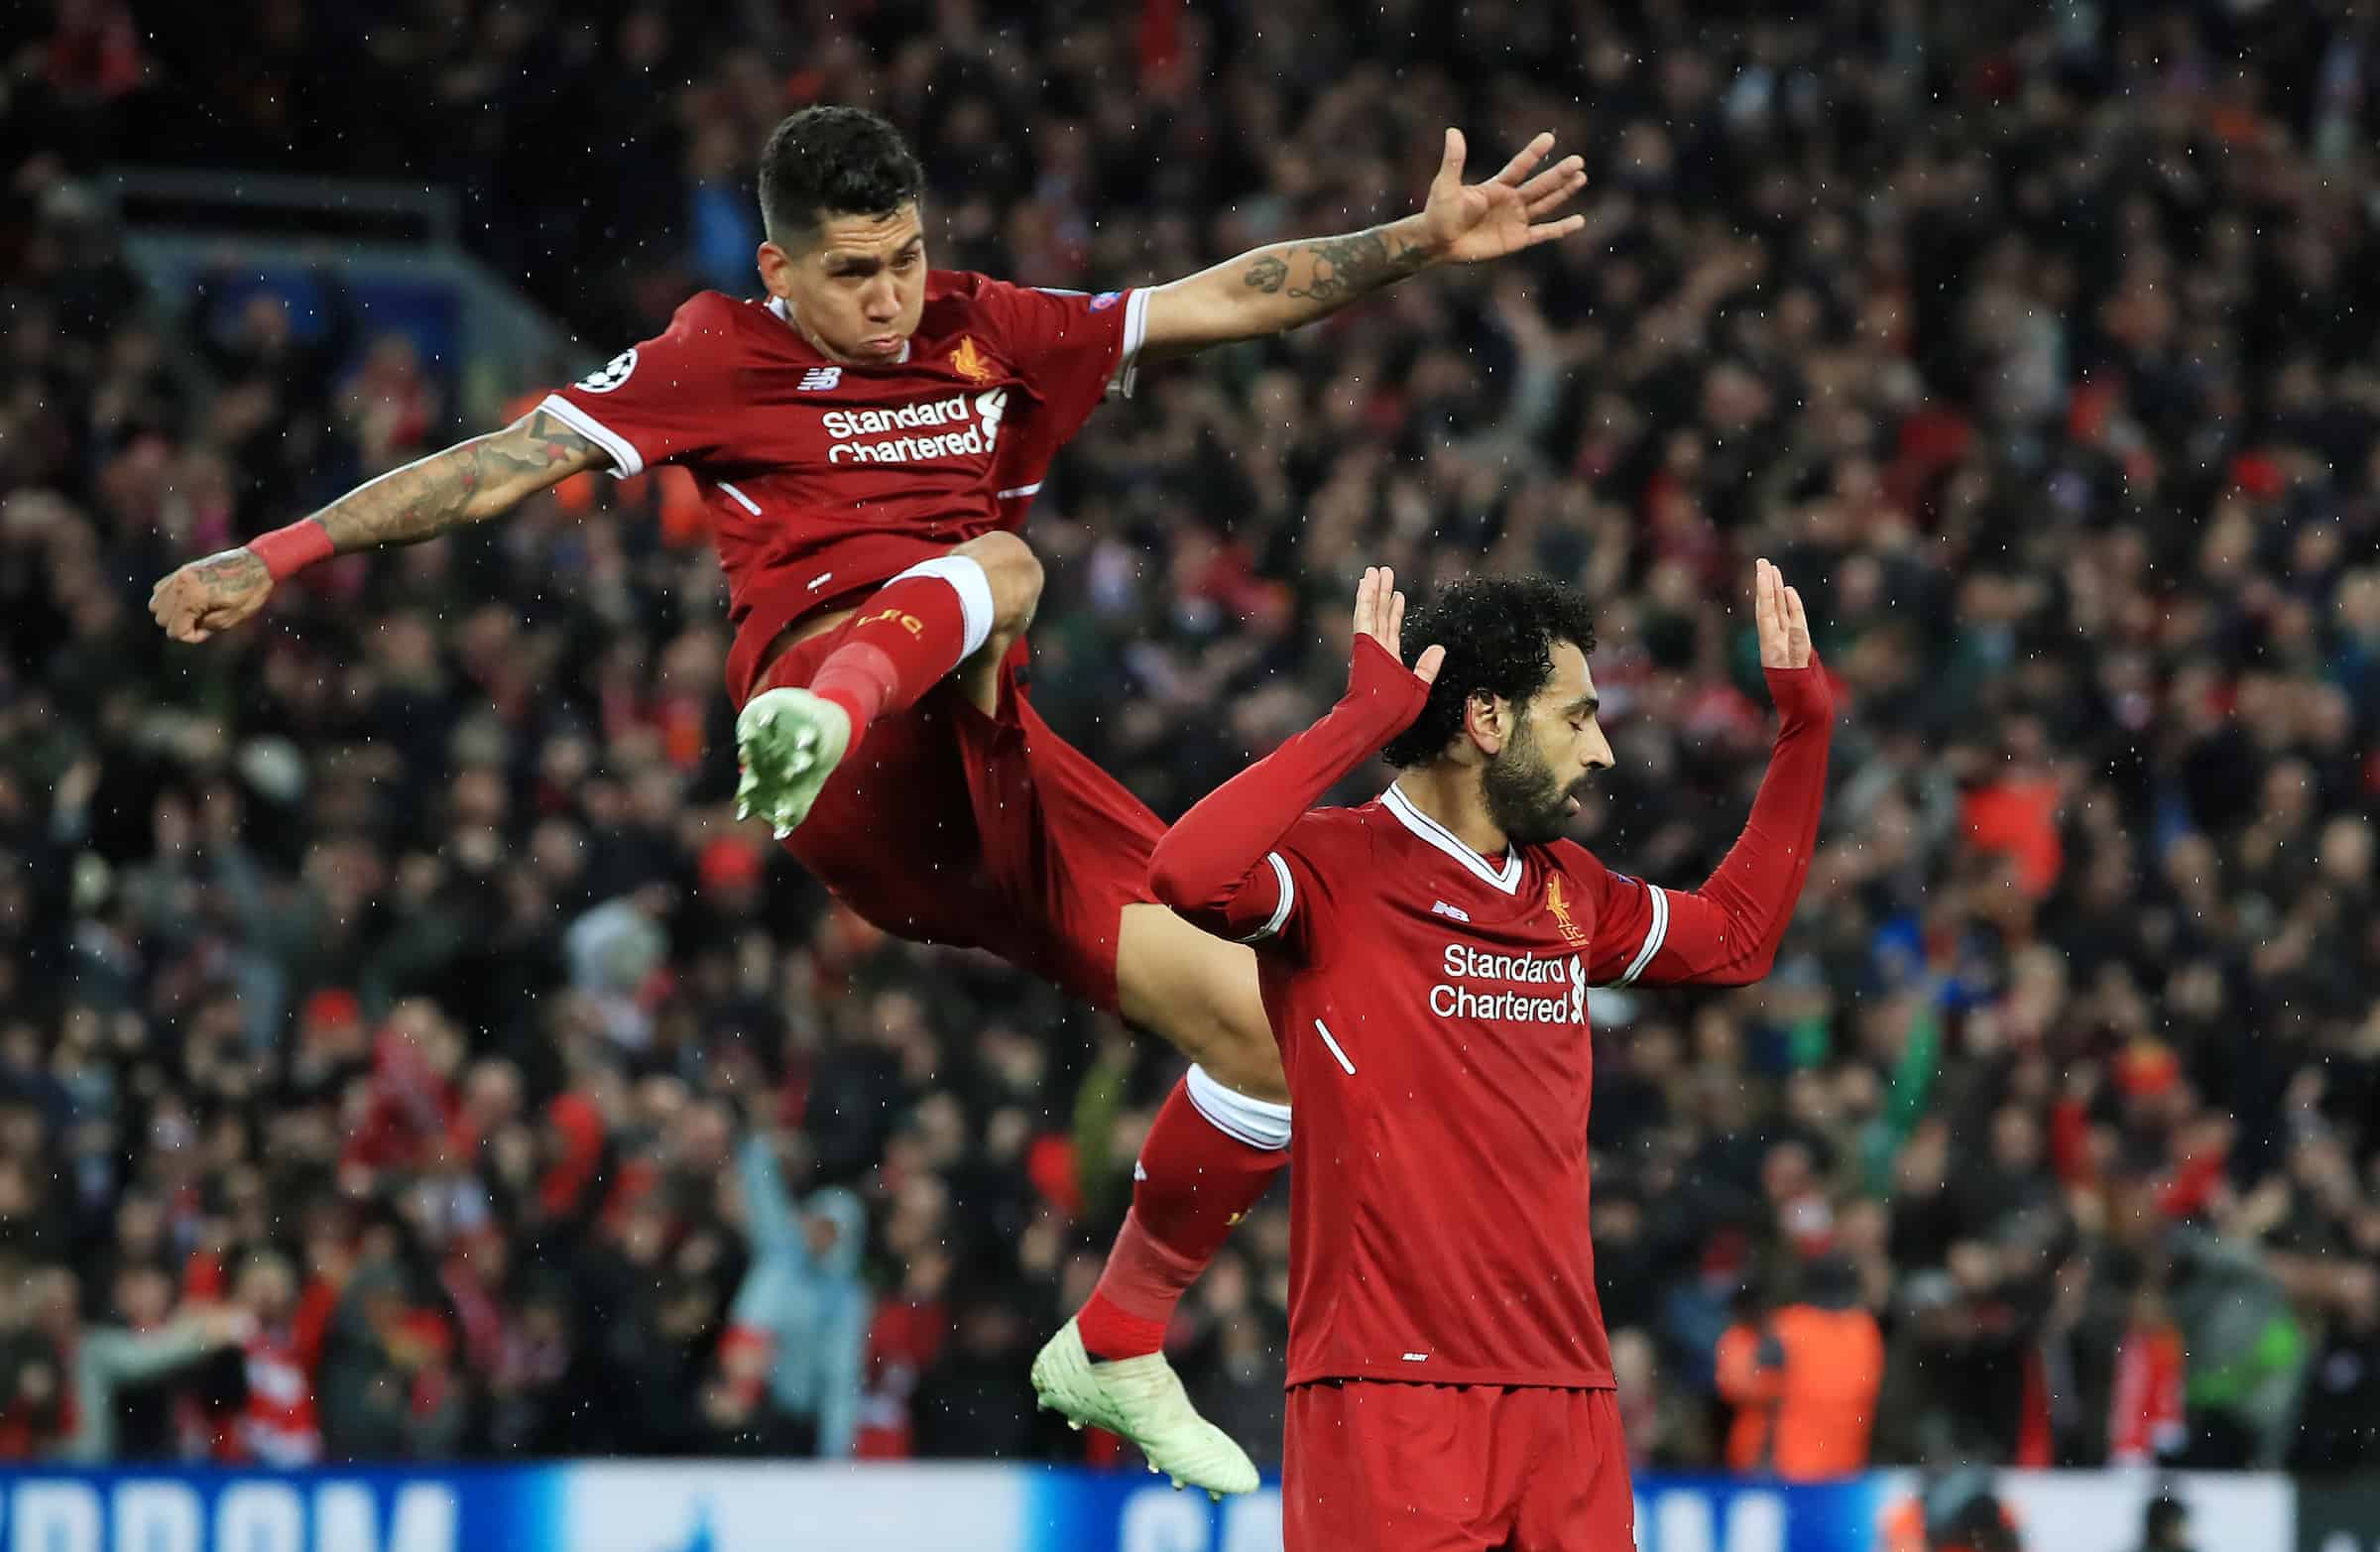 Liverpool's Mohamed Salah (right) celebrates scoring his side's second goal of the game with Roberto Firmino during the UEFA Champions League, Semi Final First Leg match at Anfield, Liverpool.